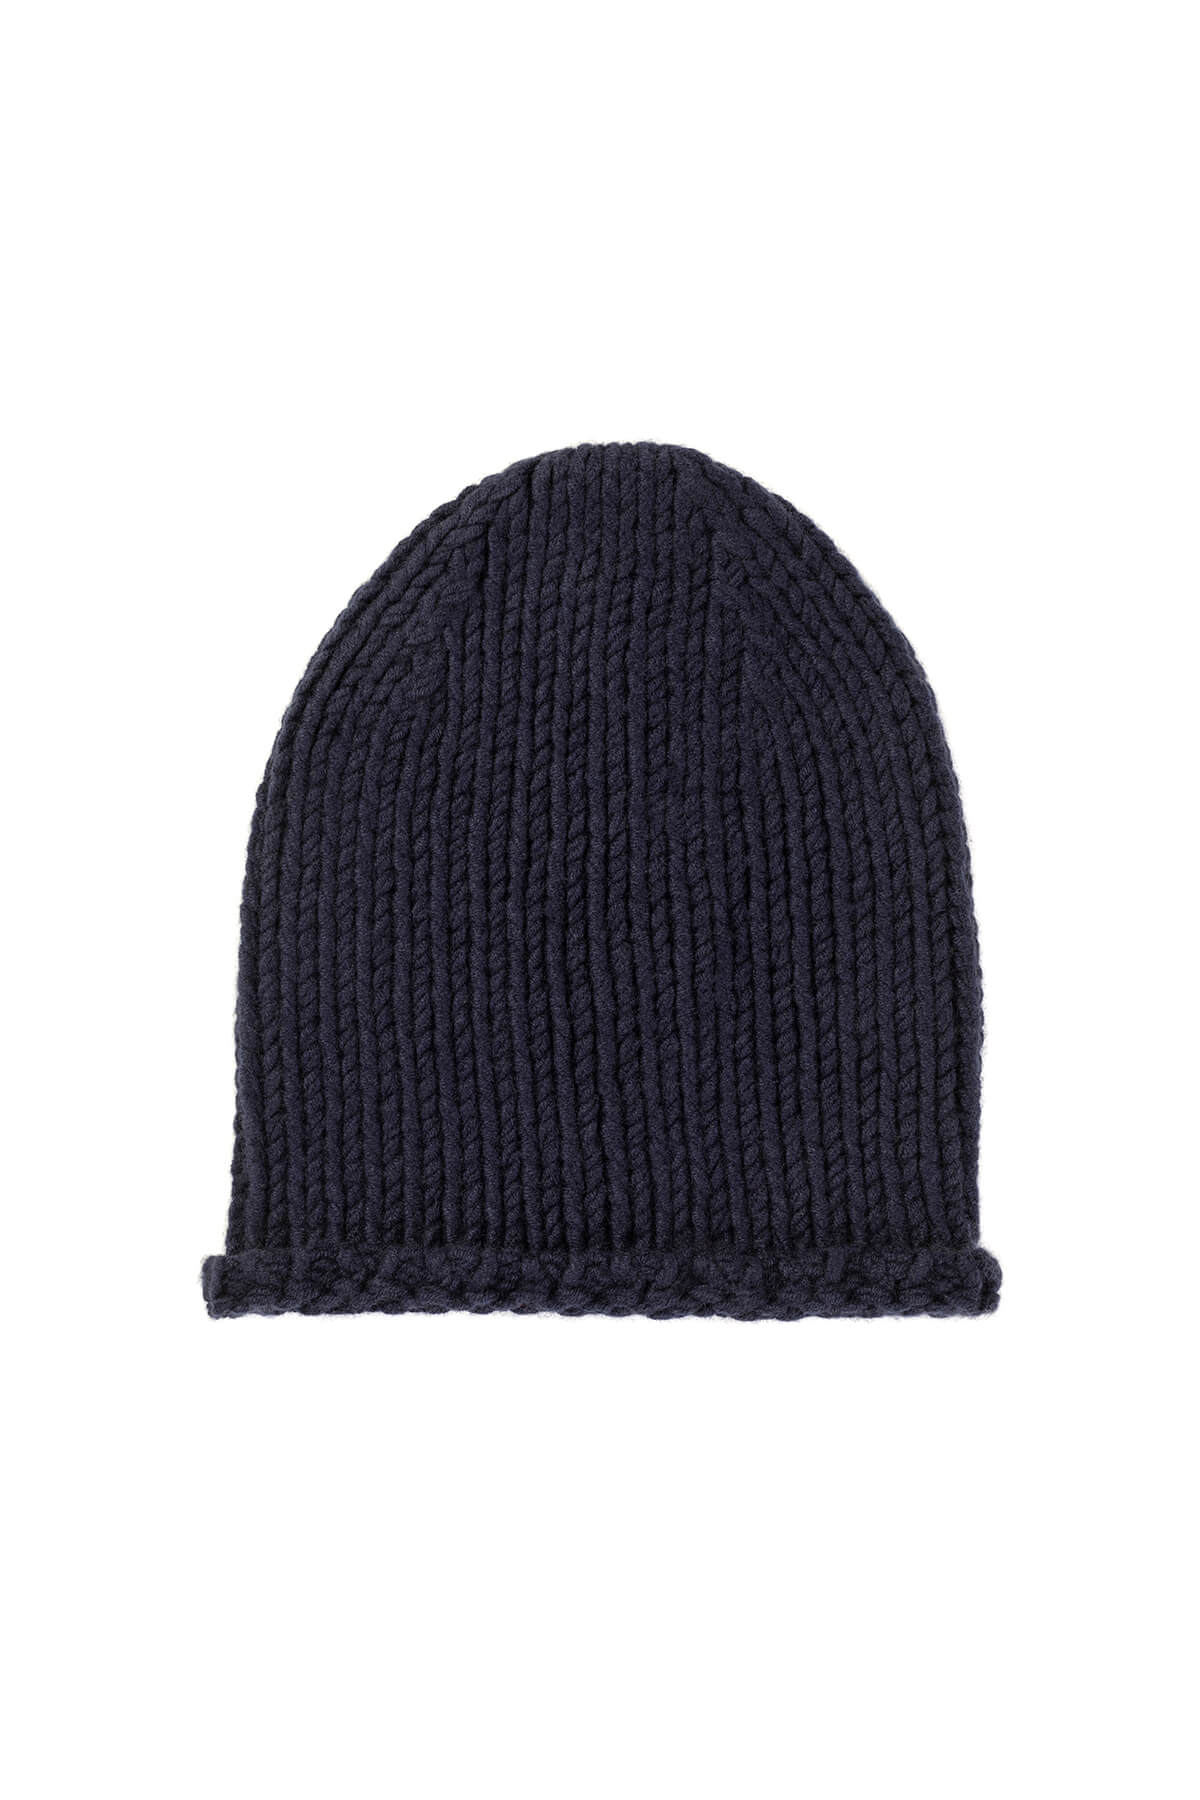 Johnstons of Elgin’s Navy Chunky Jersey Cashmere Hat on a white background HAB03196SD0707ONE